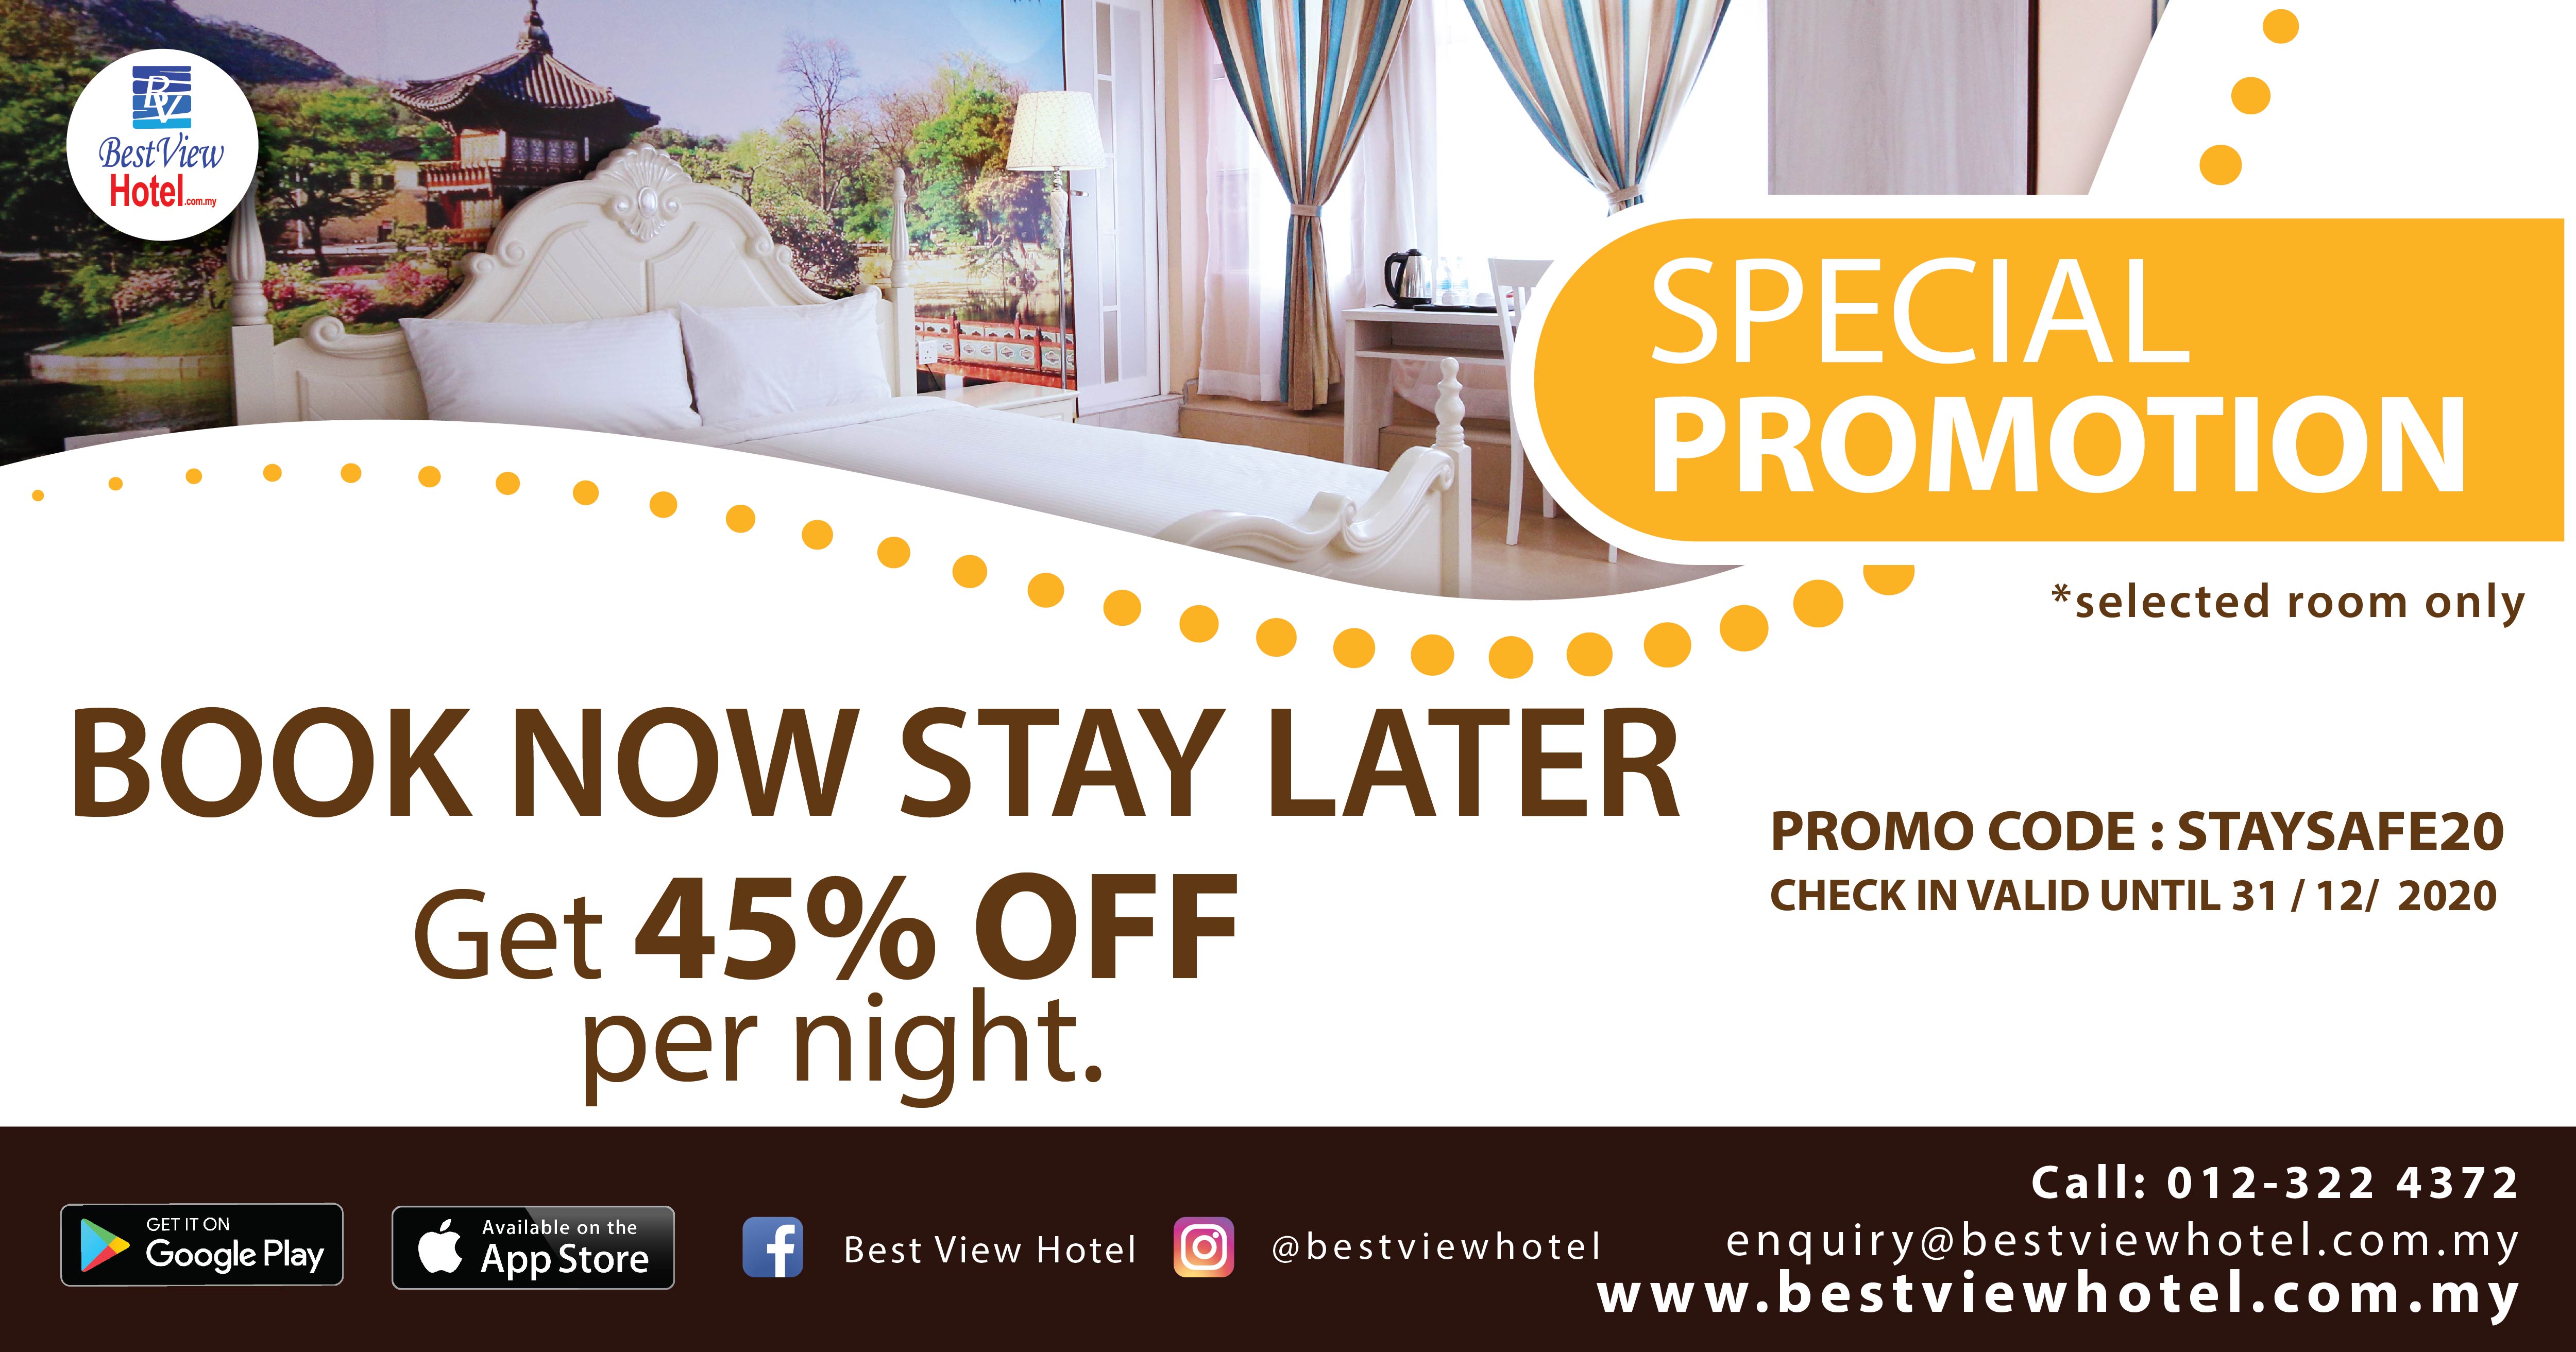 BOOK NOW STAY LATER!